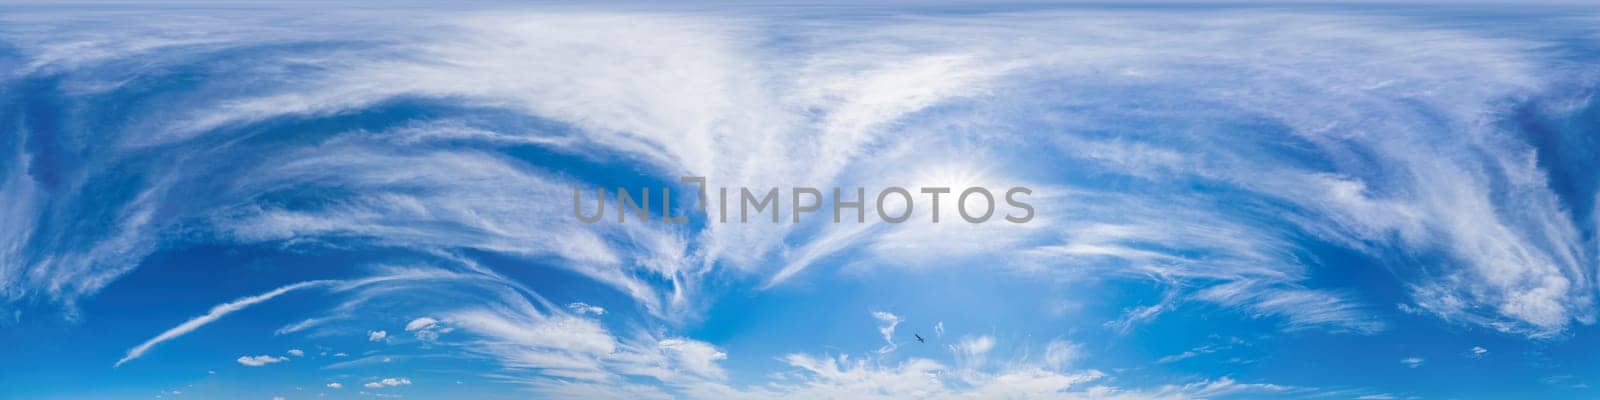 Blue summer 360 panorama of sky with clouds, no ground, in spherical equirectangular format for easy use in 3D graphics and aerial or ground composites, seamless and suitable for sky replacement. by panophotograph